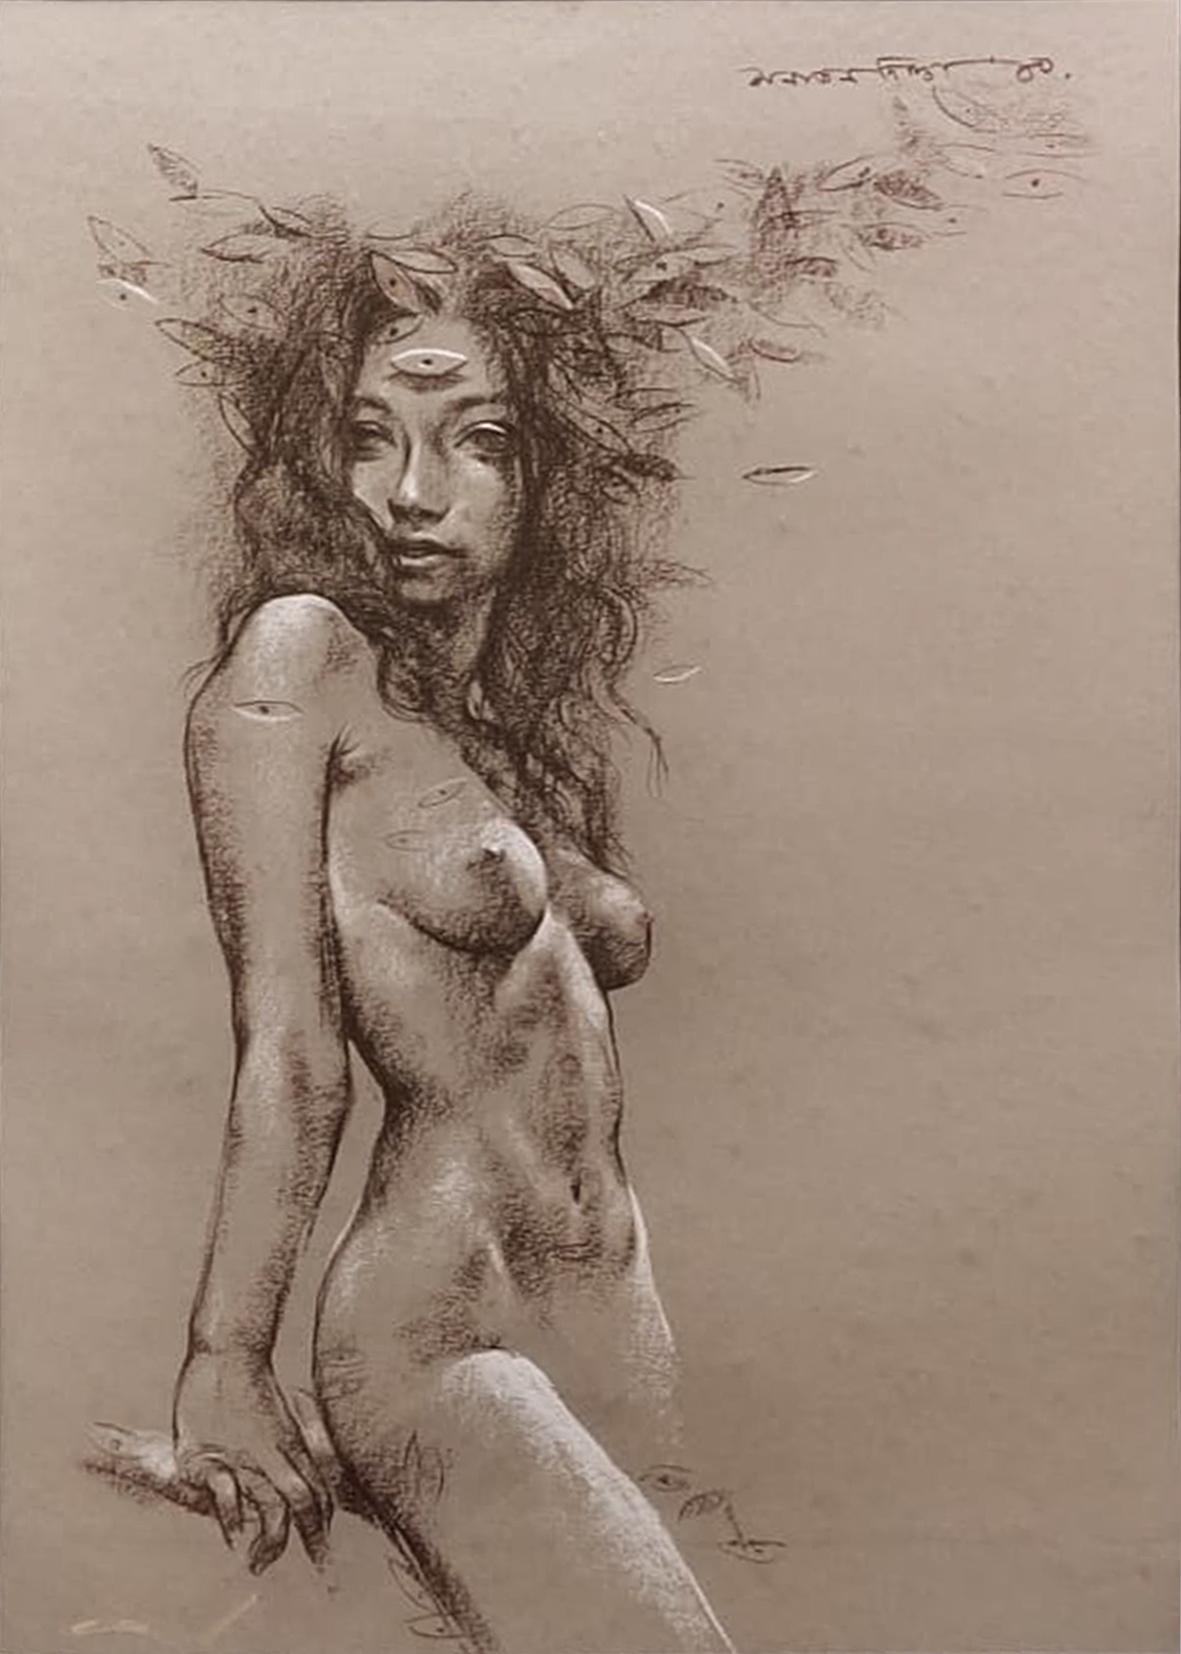 Nude Woman, Conte on Paper, Brown, Black, Contemporary Indian Artist "In Stock"